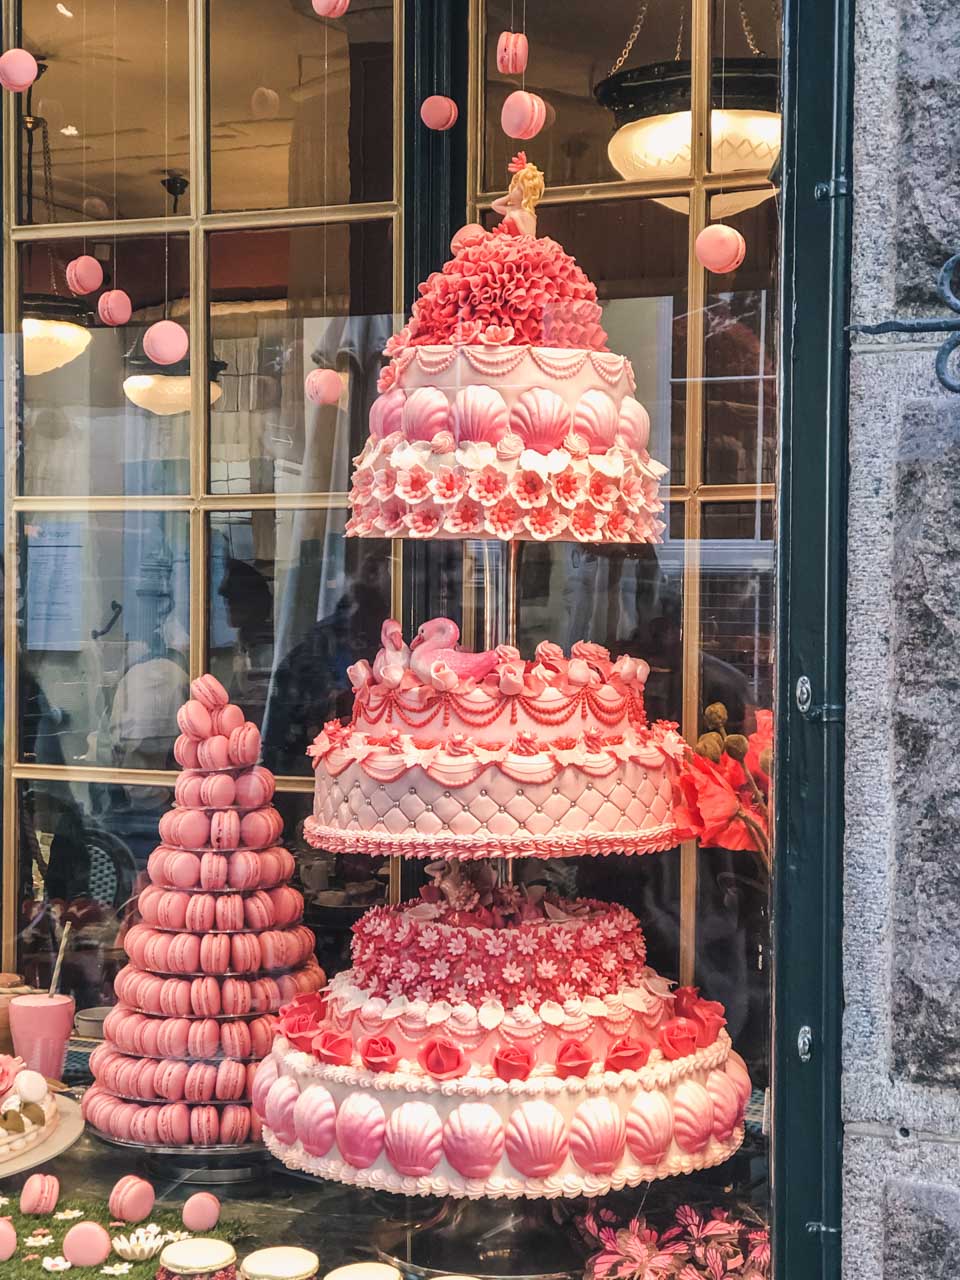 A cake and macaroons on display at La Glace in Copenhagen, Denmark